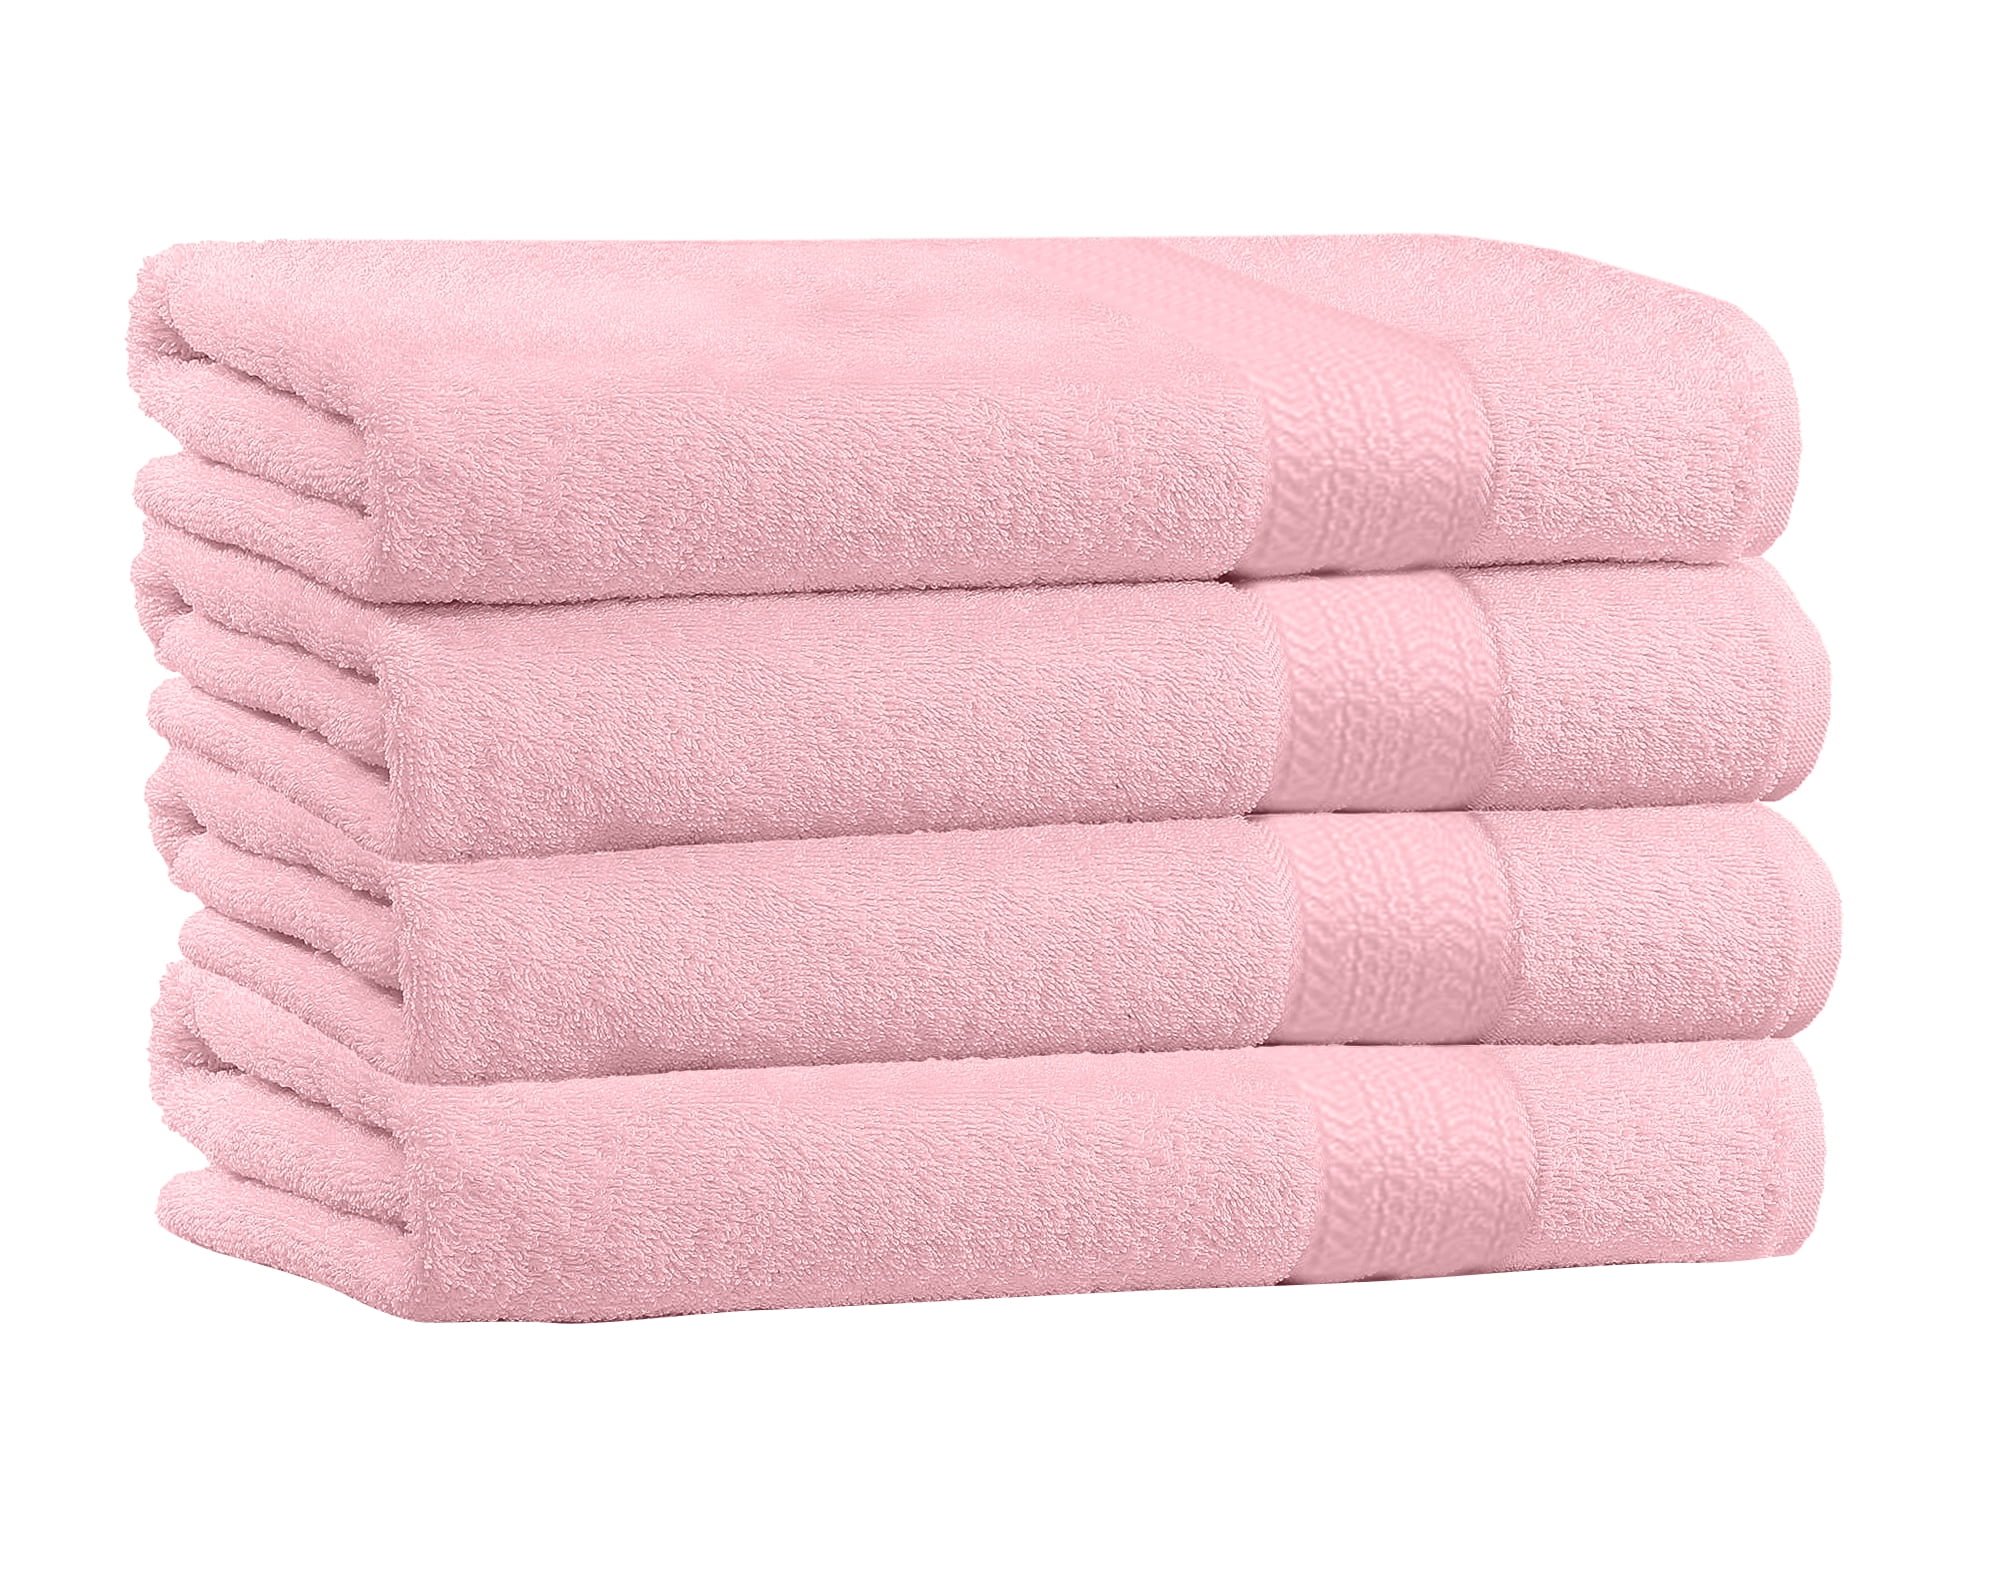 ORIGHTY Bath Towels Set Pack of 4(27’’ x 54’’) - Soft Feel Microfiber White  Bath Towels for Bathroom, Highly Absorbent Bath Sheet, Quick Drying Shower